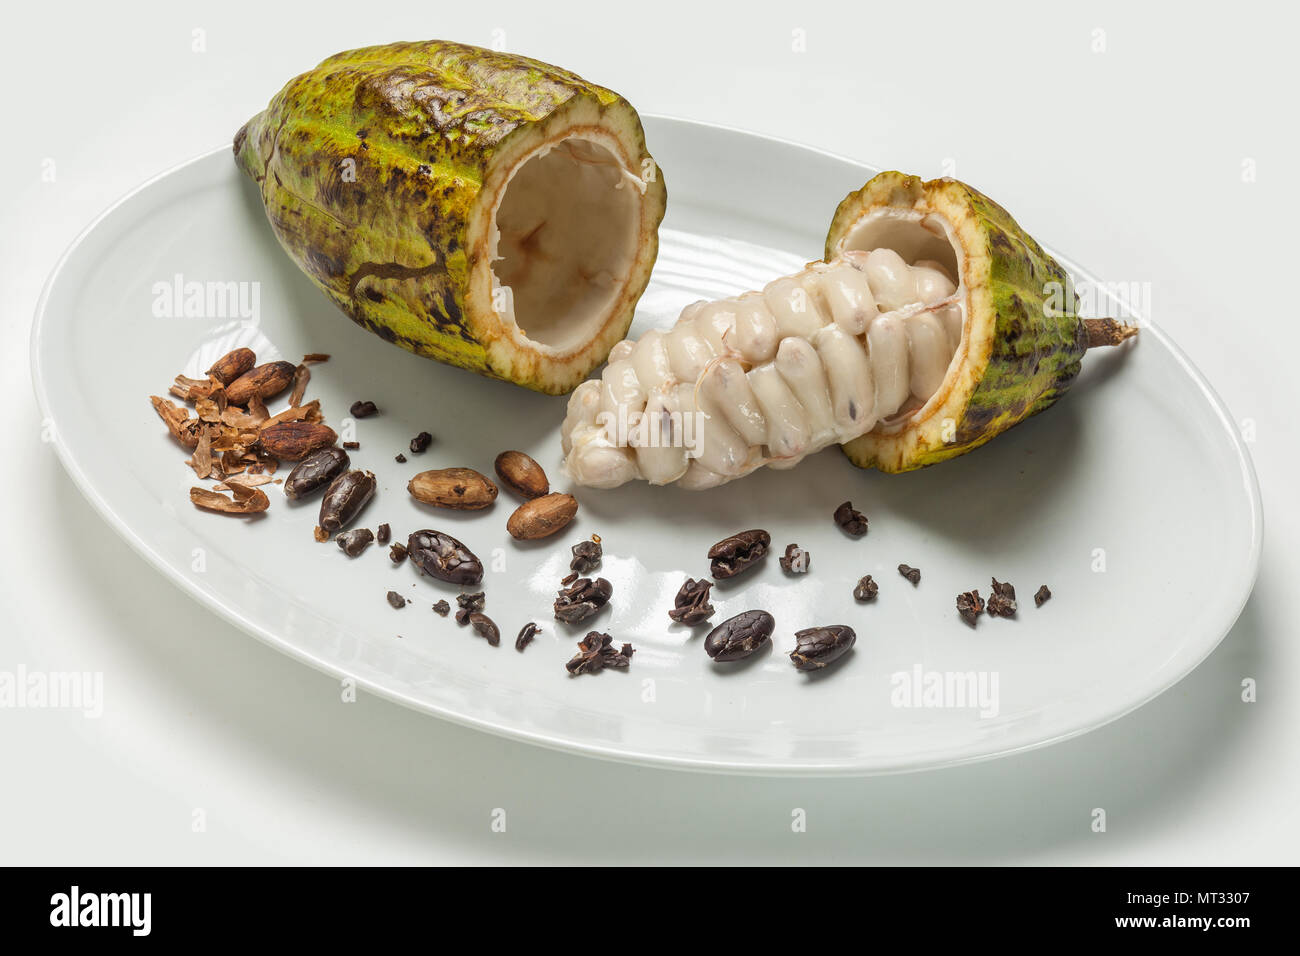 Cabossa and cocoa beans Stock Photo